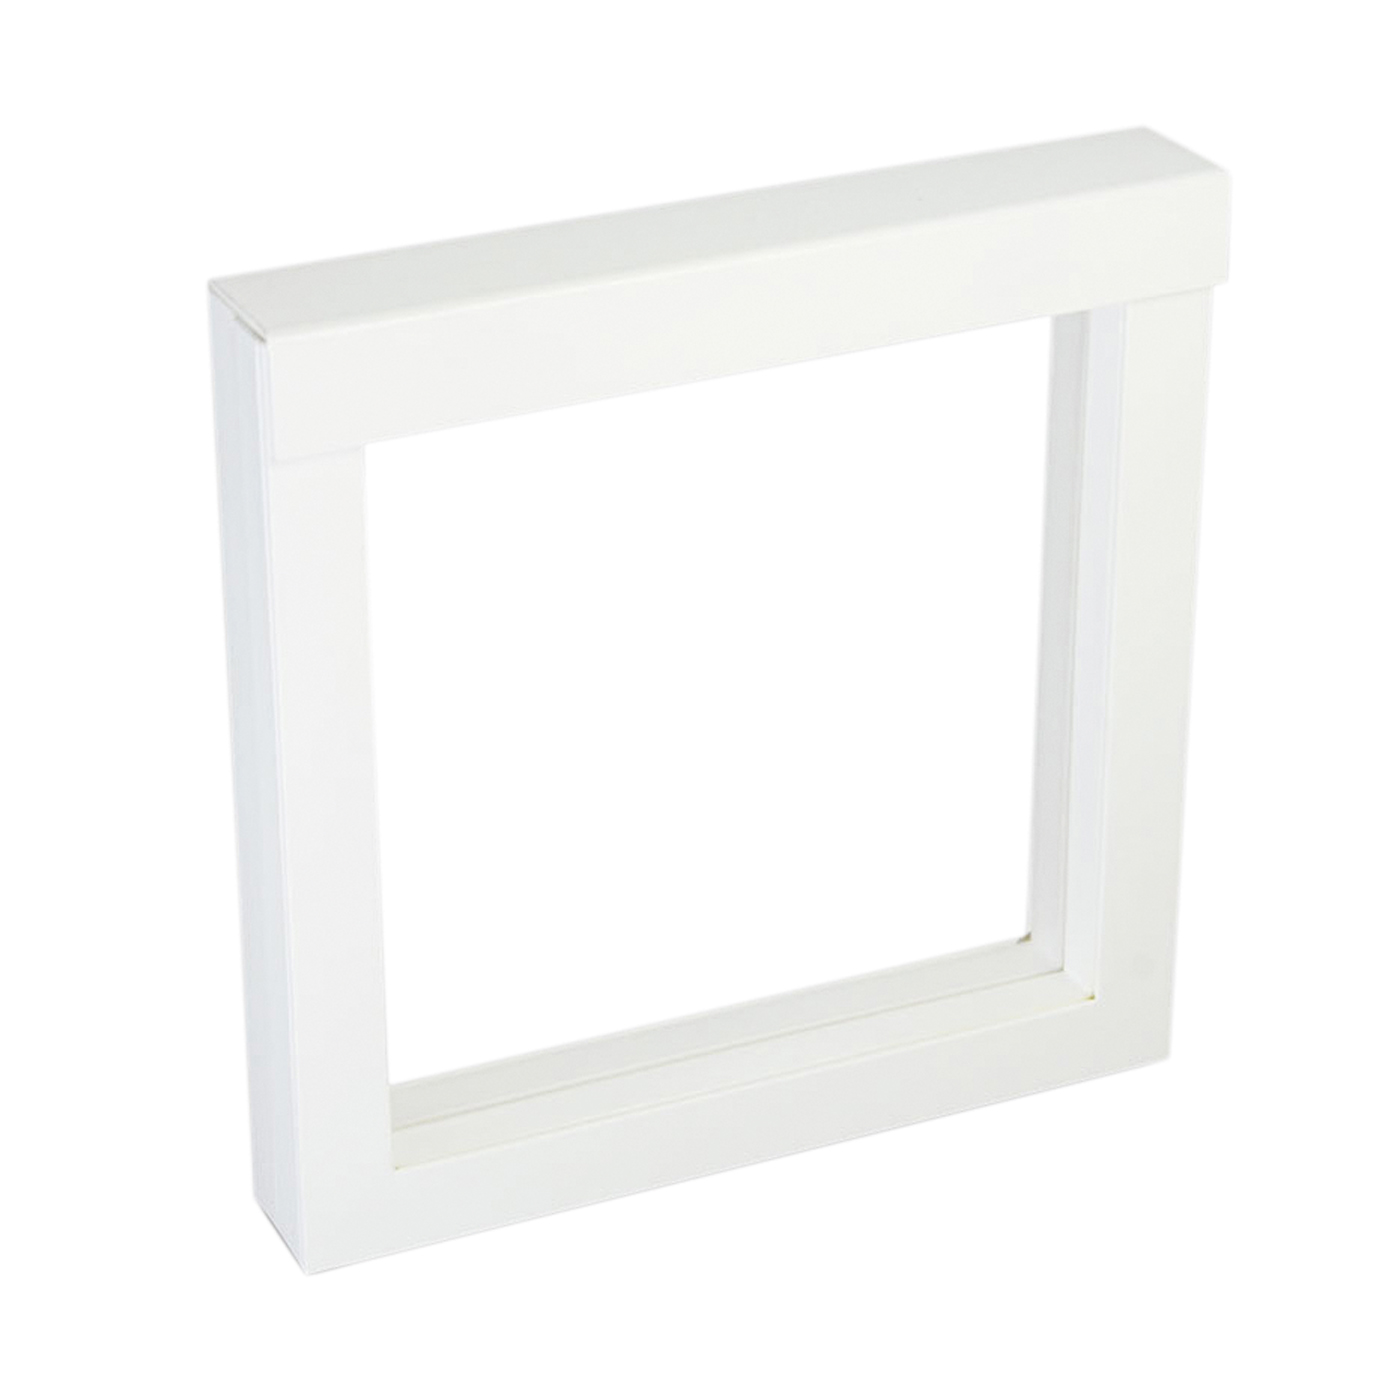 Jewellery Packaging "Frame", White, 150 x 150 x 25 mm - 1 piece